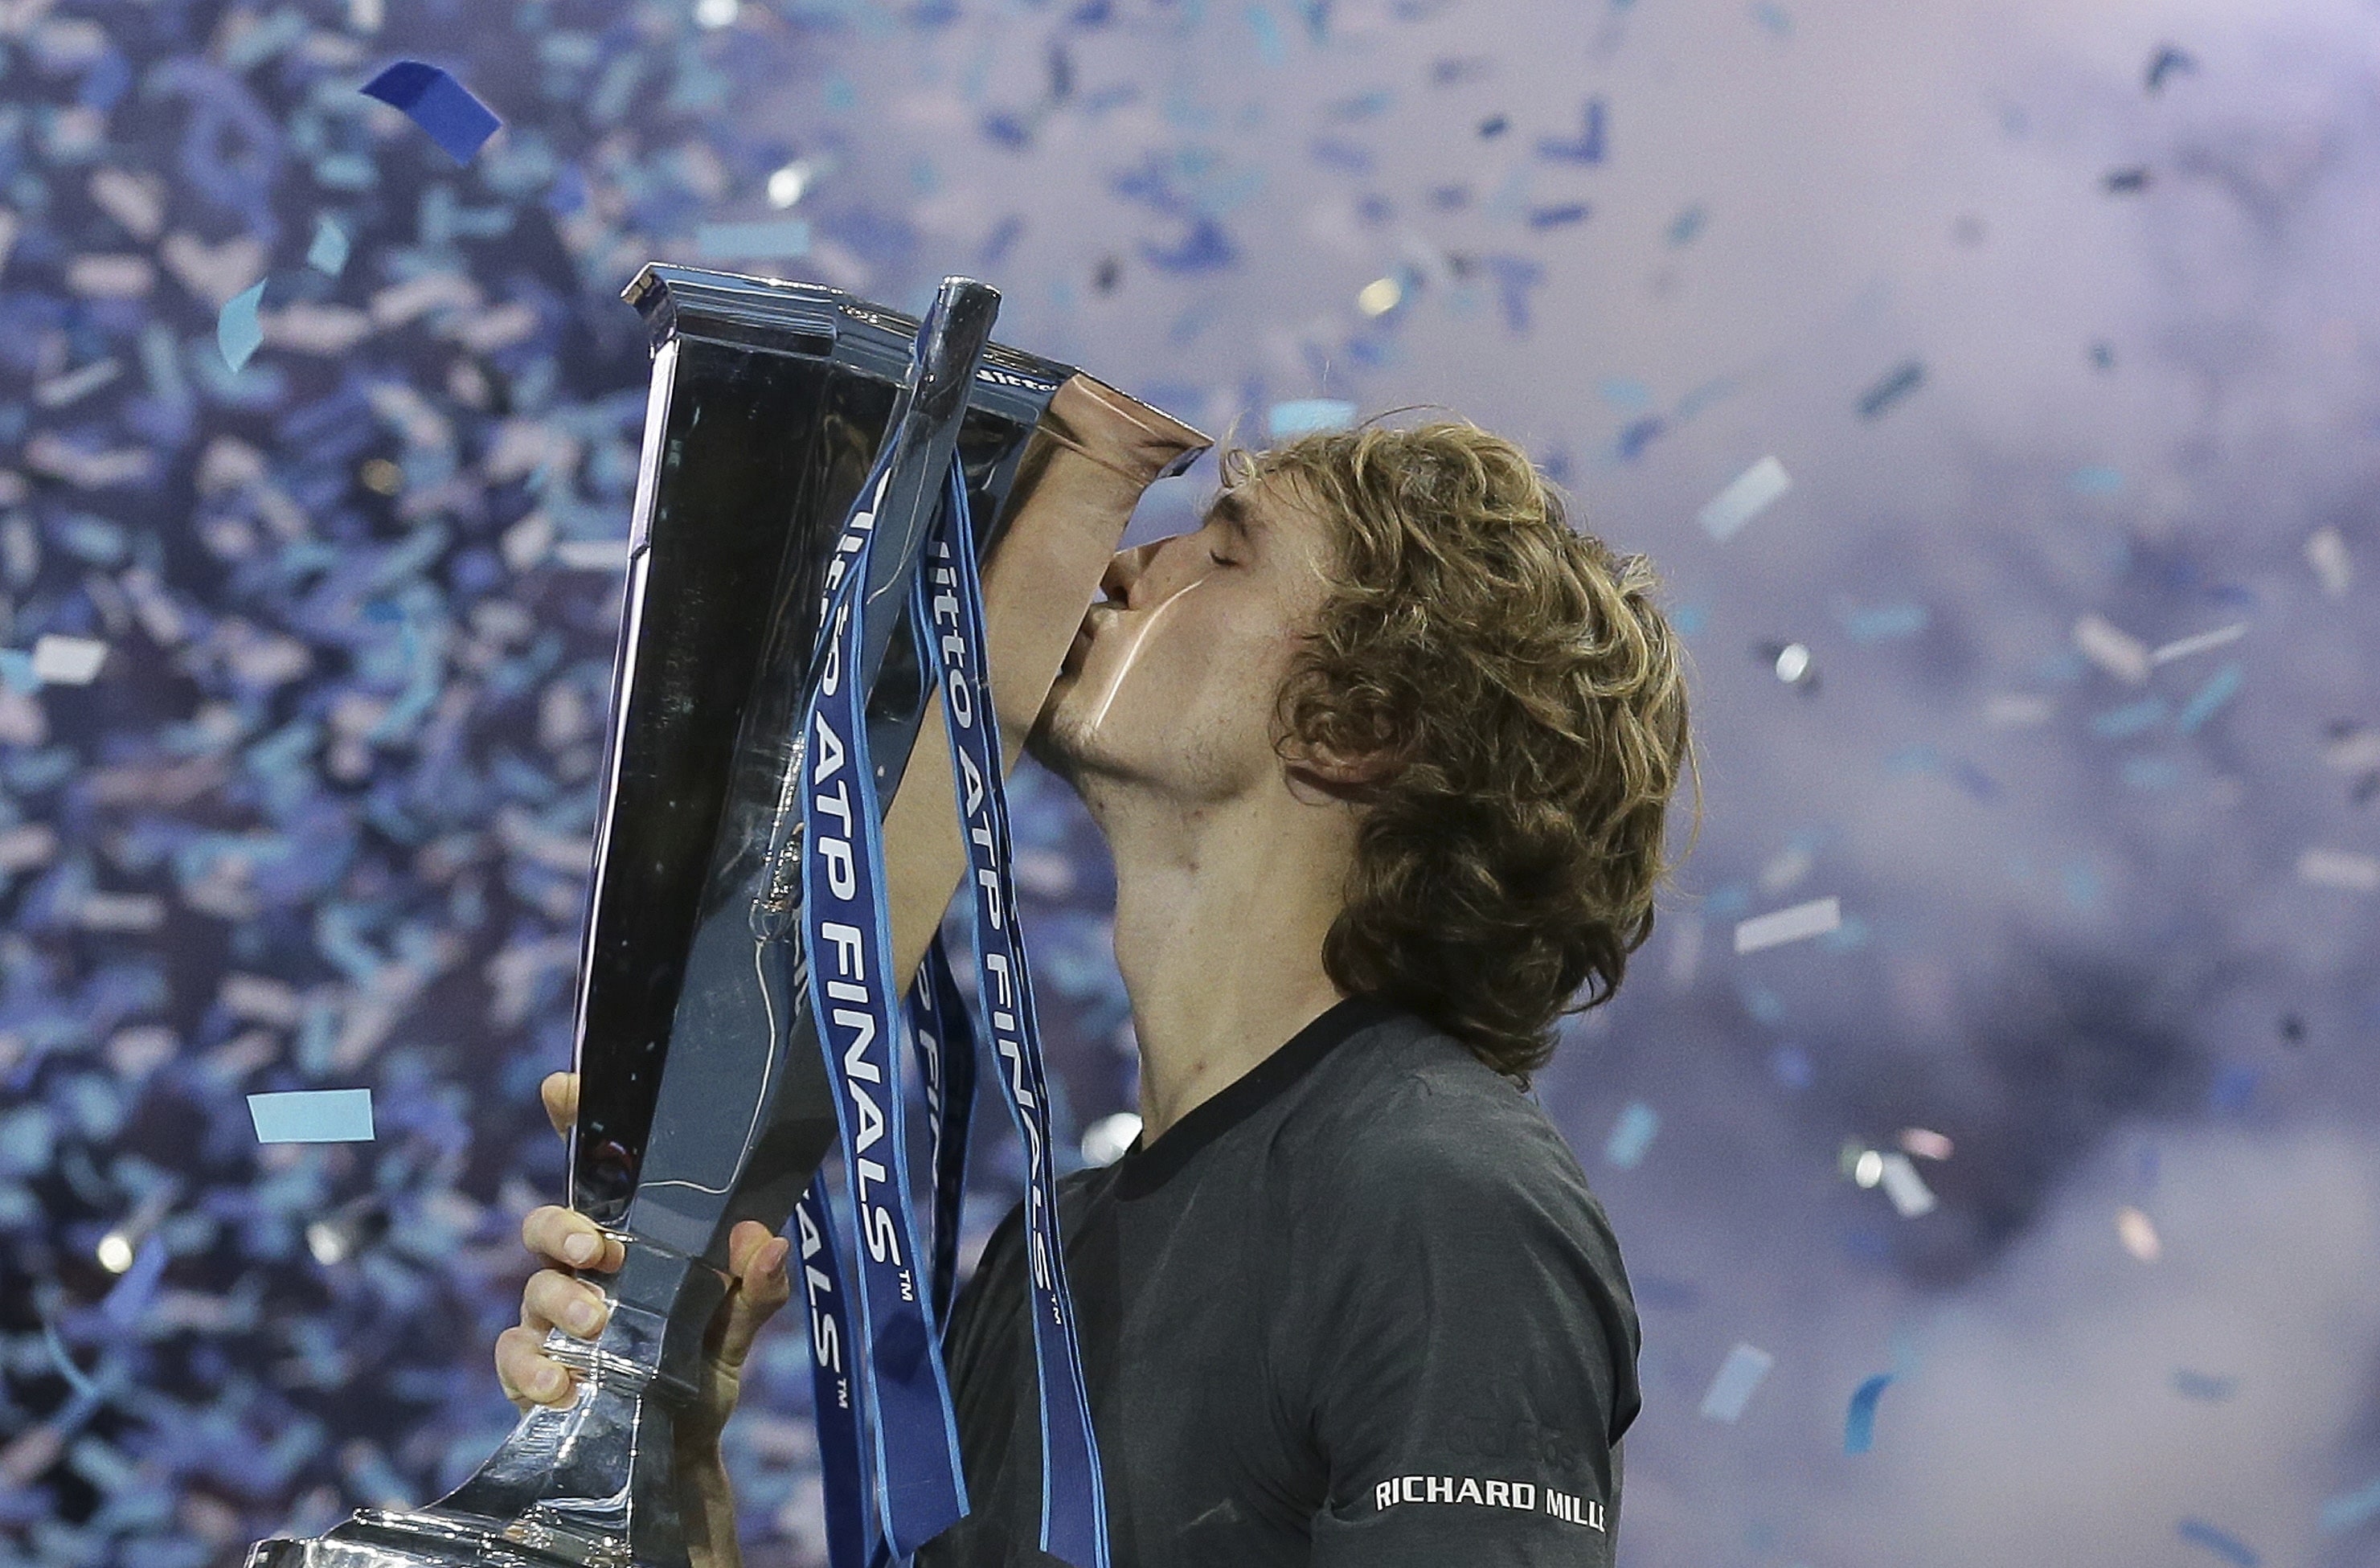 WATCH Zverev comes of age after growing up on tour